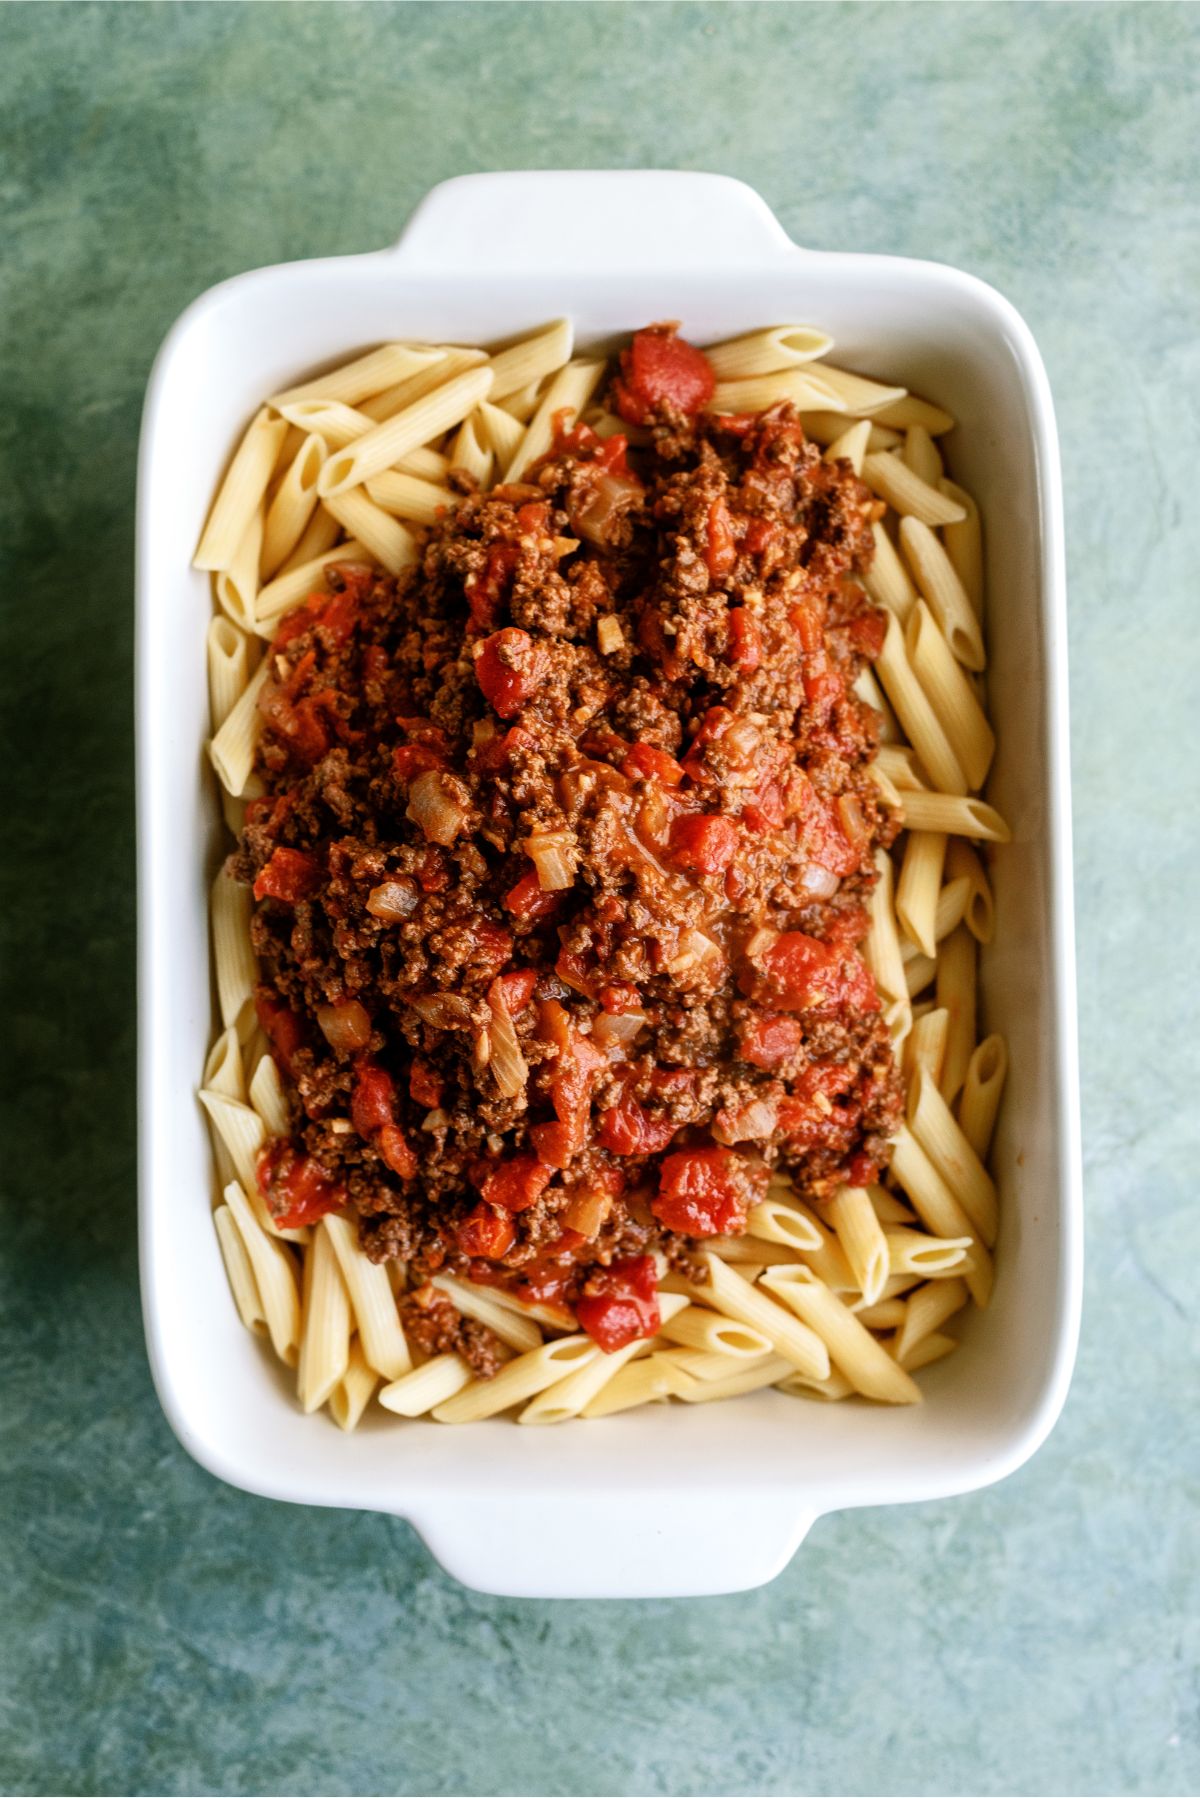 Meat sauce on top of noodles in casserole dish